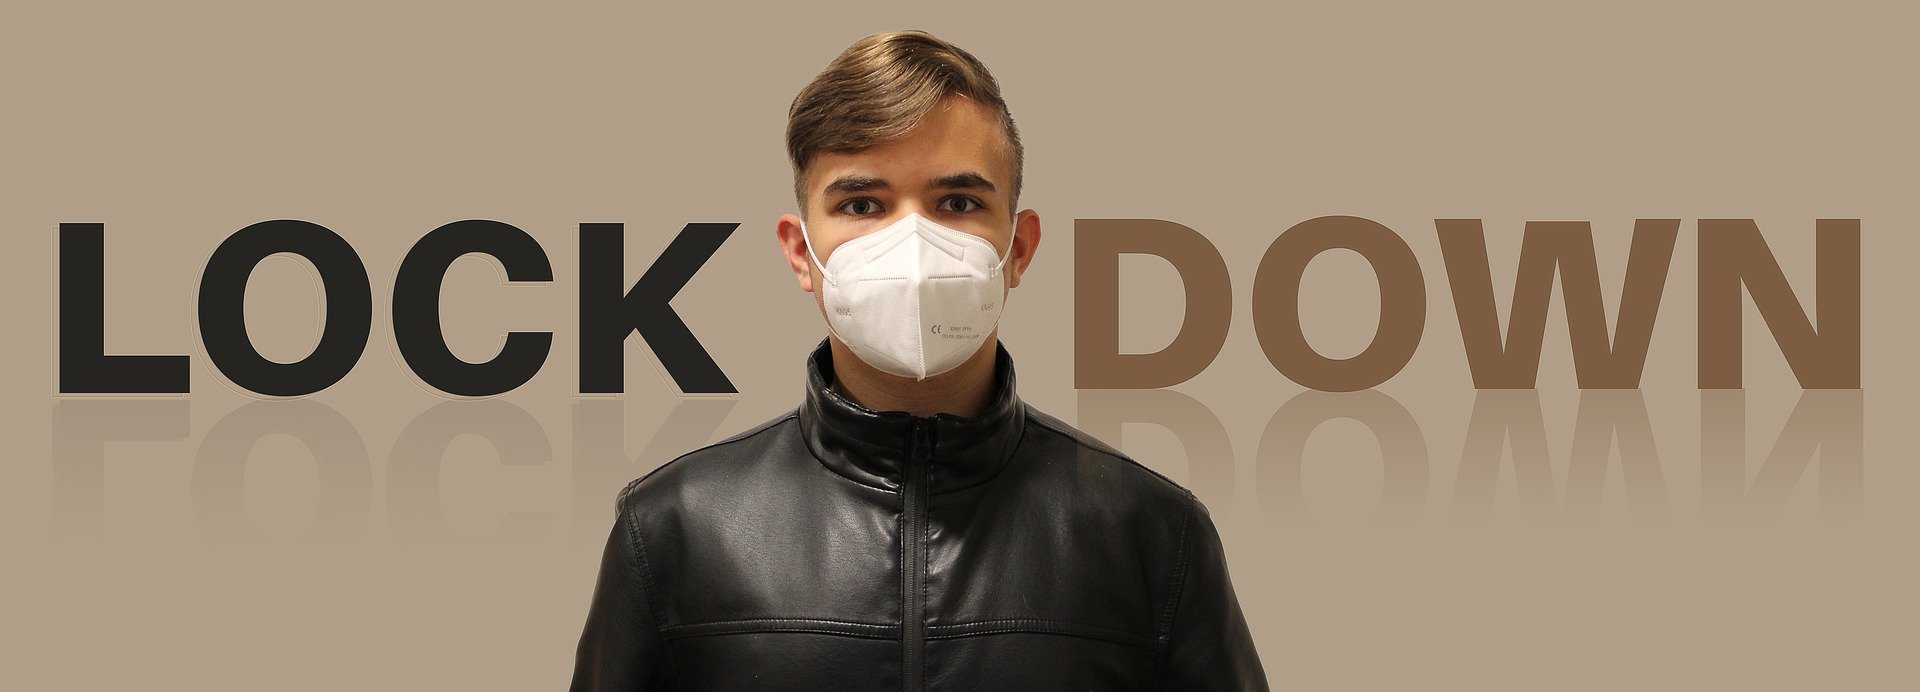 Image of boy wearing mask in front of text saying "Lock Down"